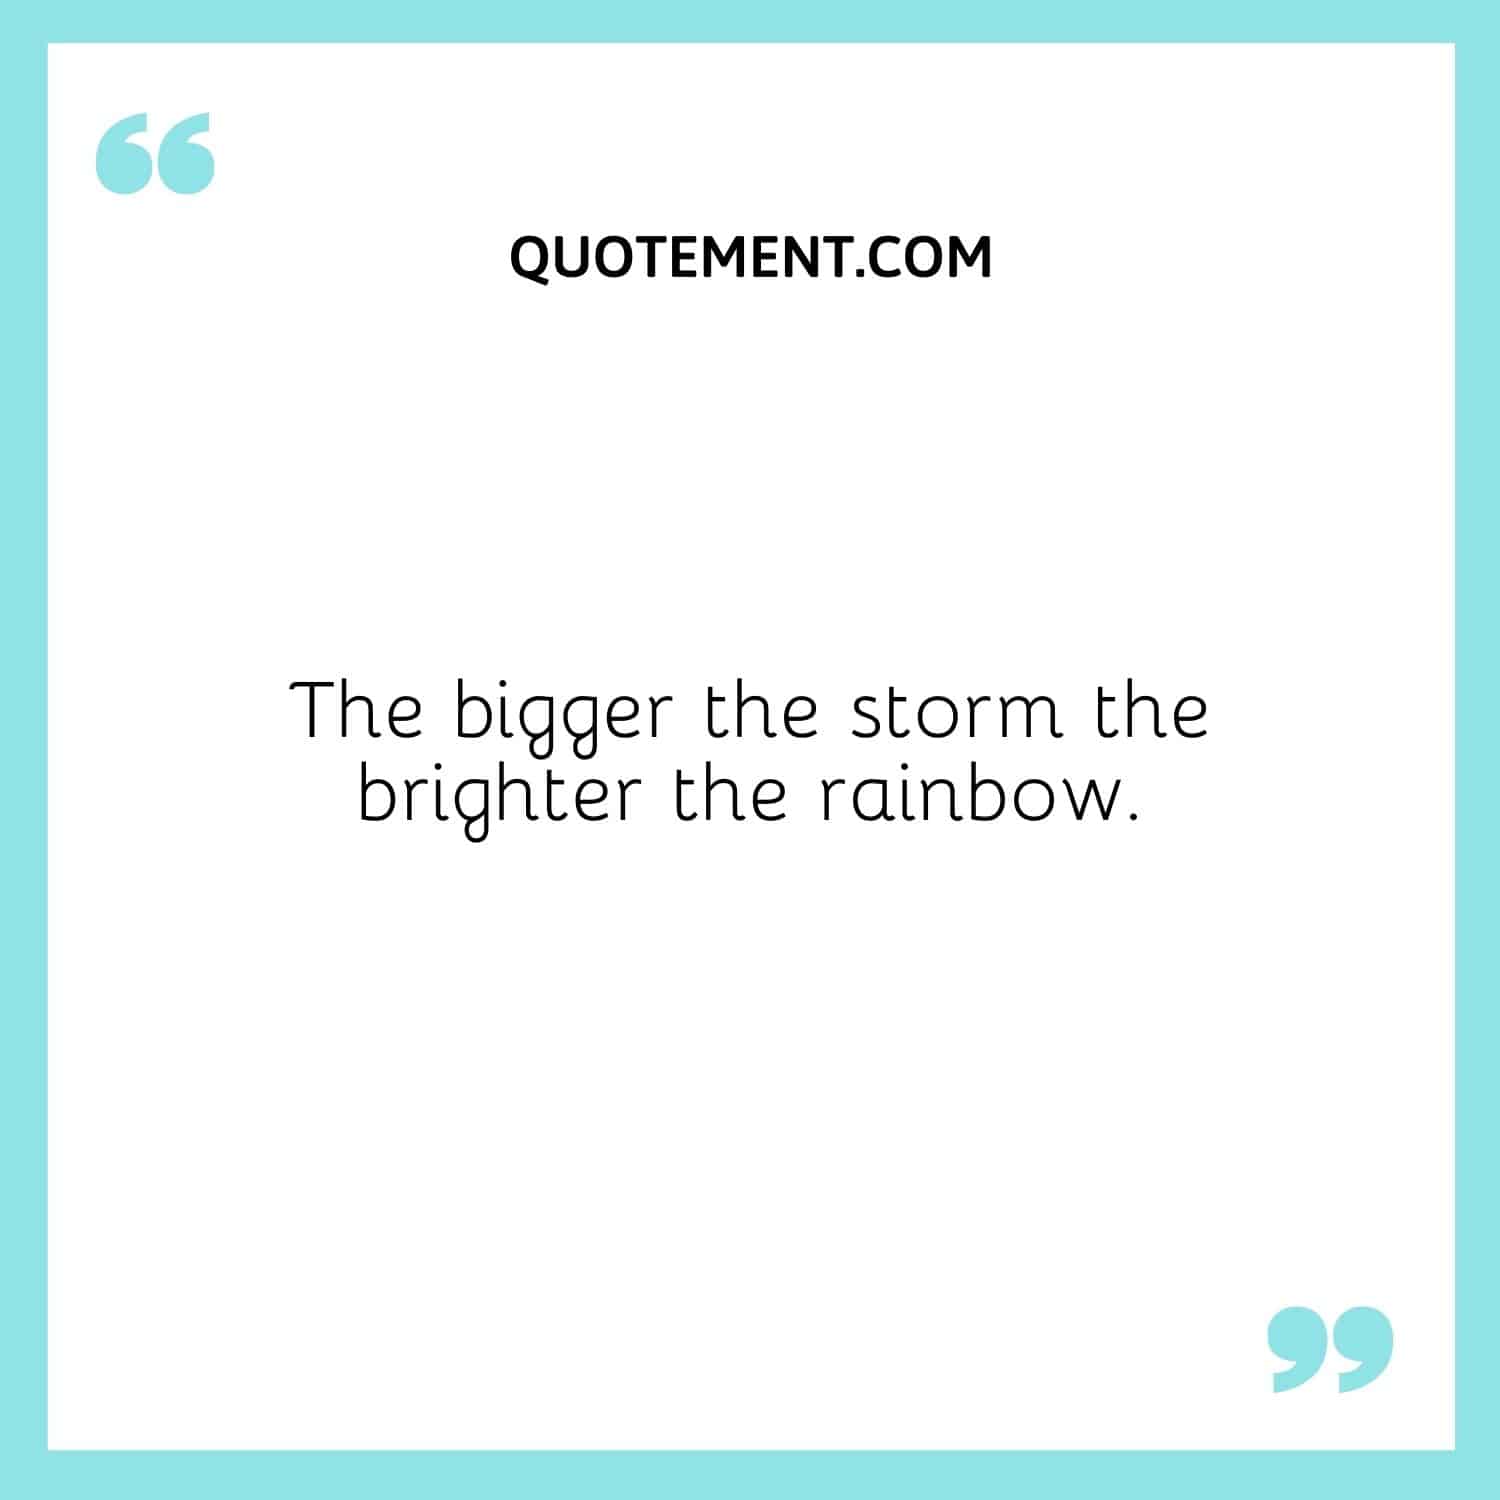 The bigger the storm the brighter the rainbow.